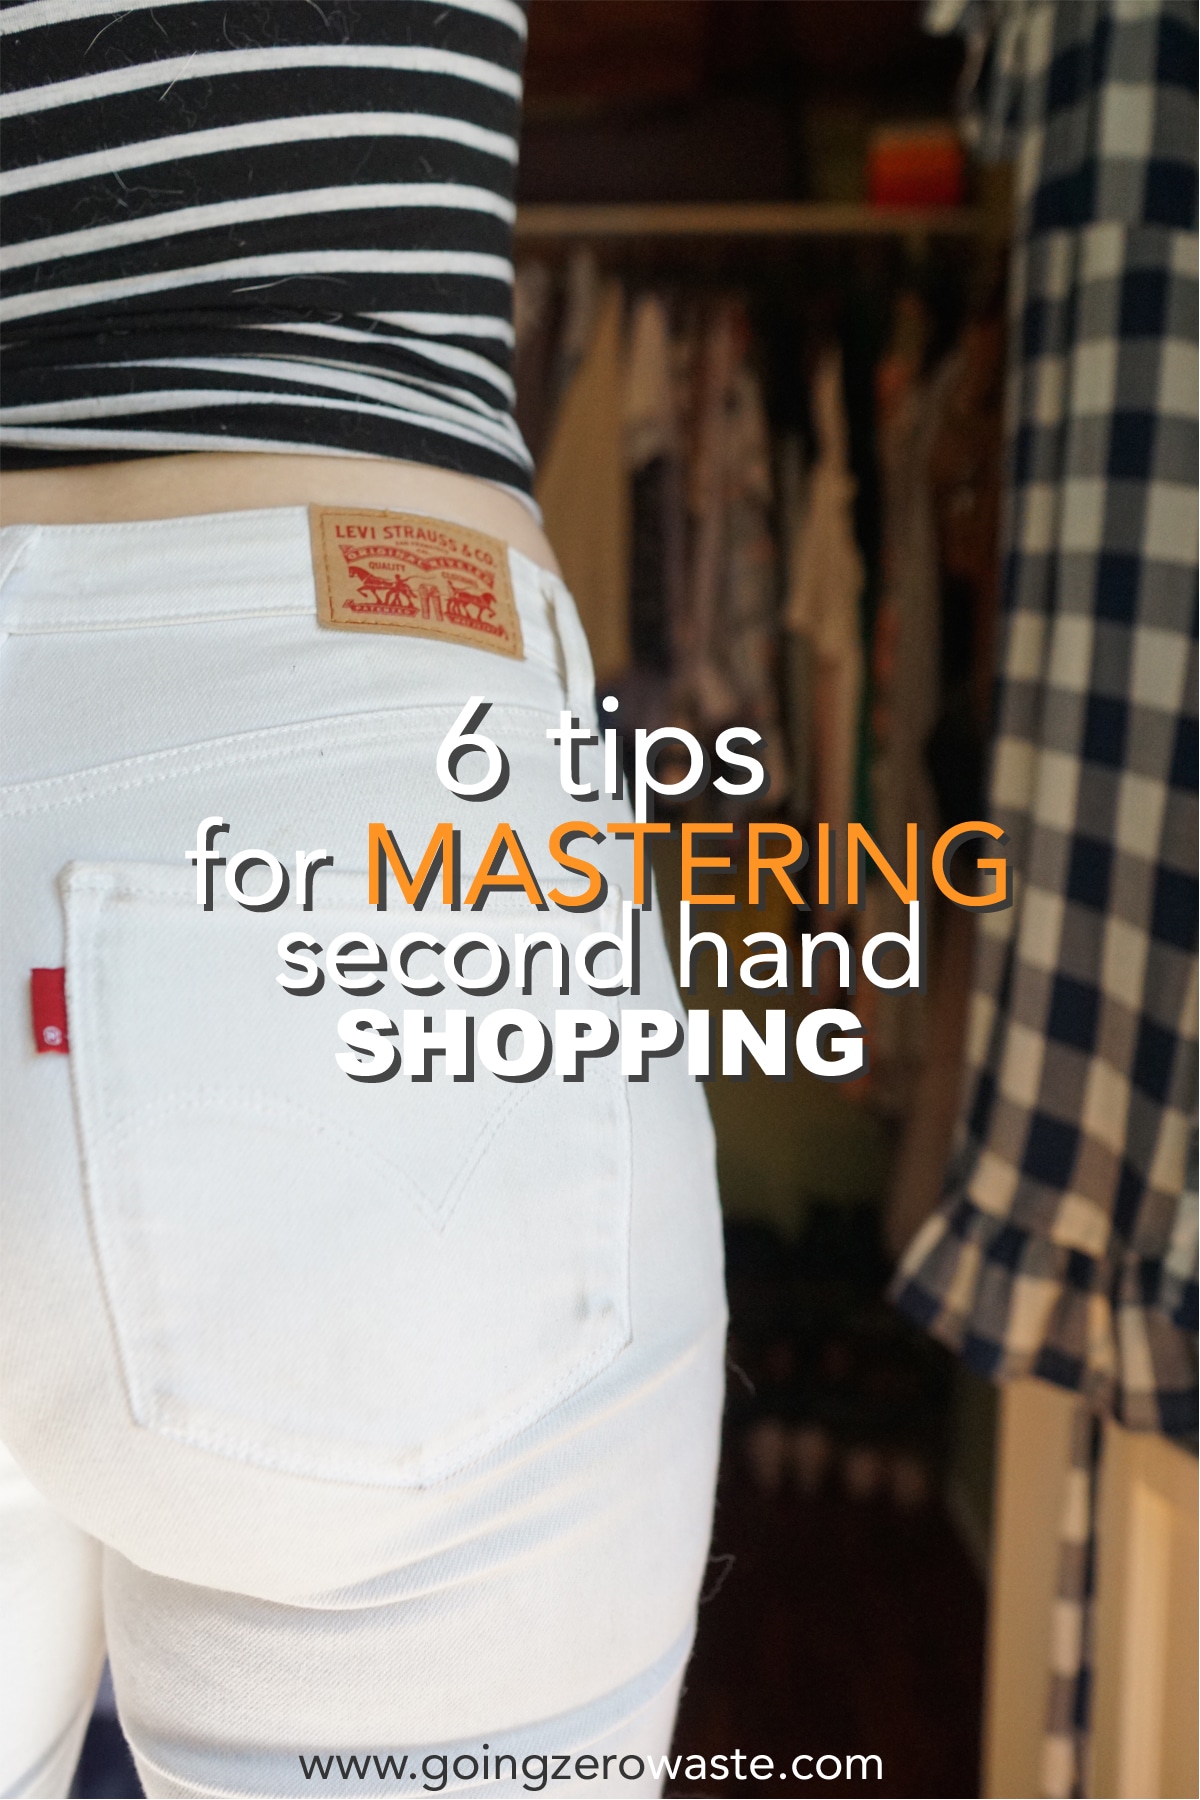 6 Tips for Mastering Secondhand Shopping